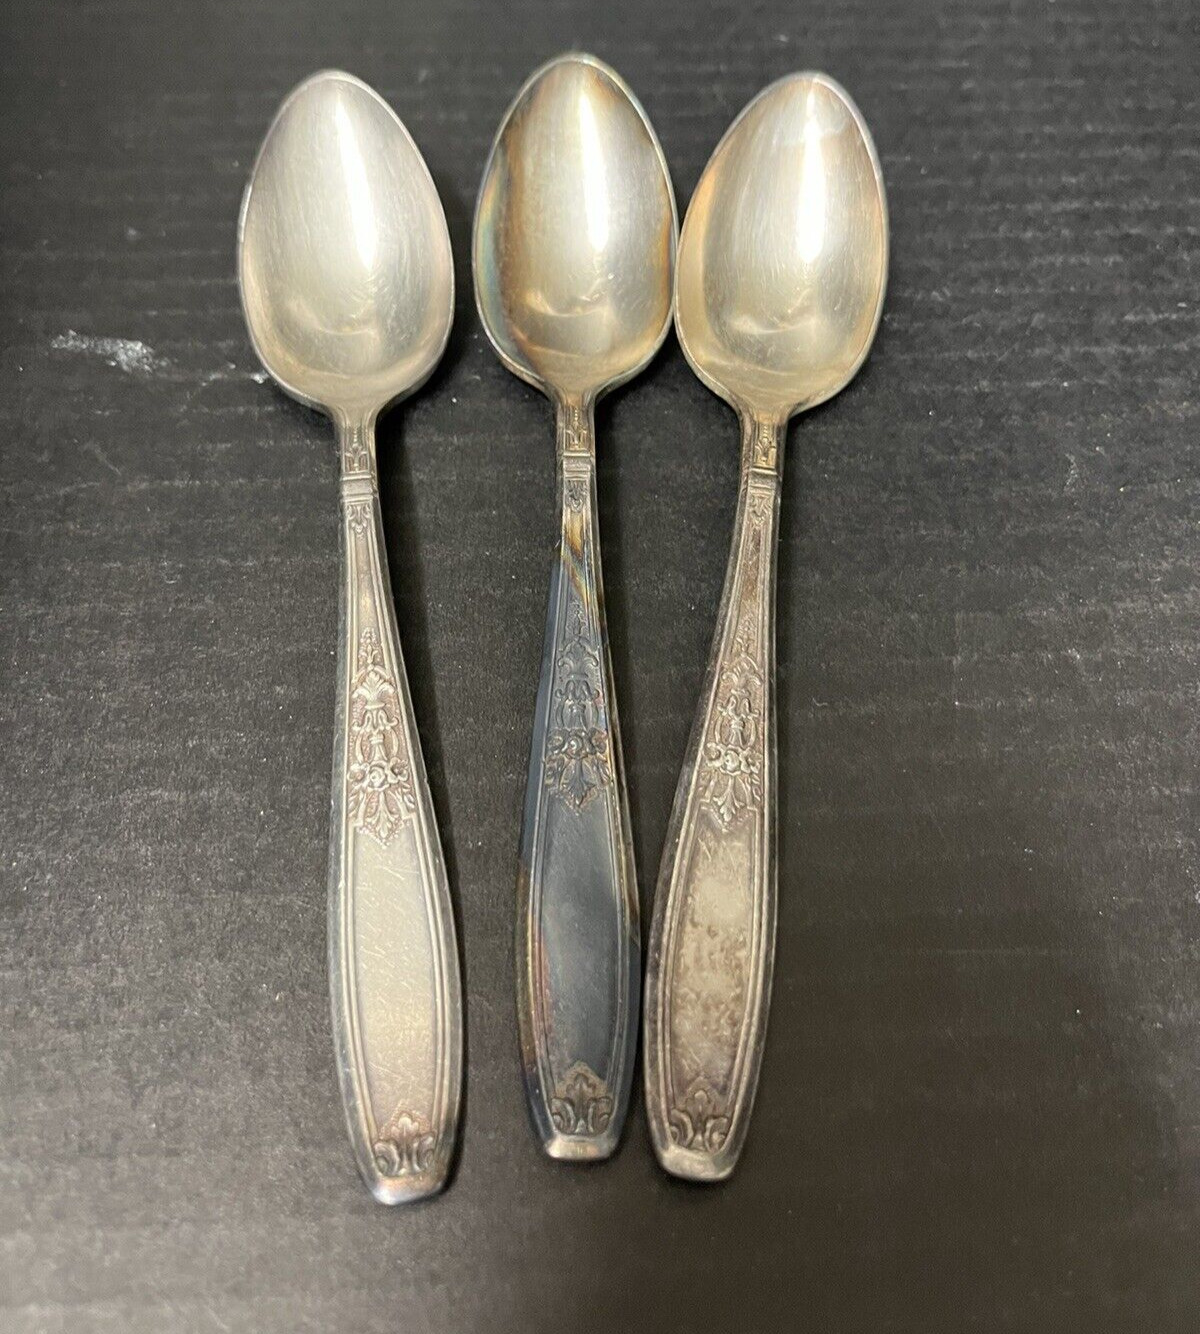 1847 Rogers Bros Silver Plate Lot of 3 Teaspoons 6 inches Long Vintage